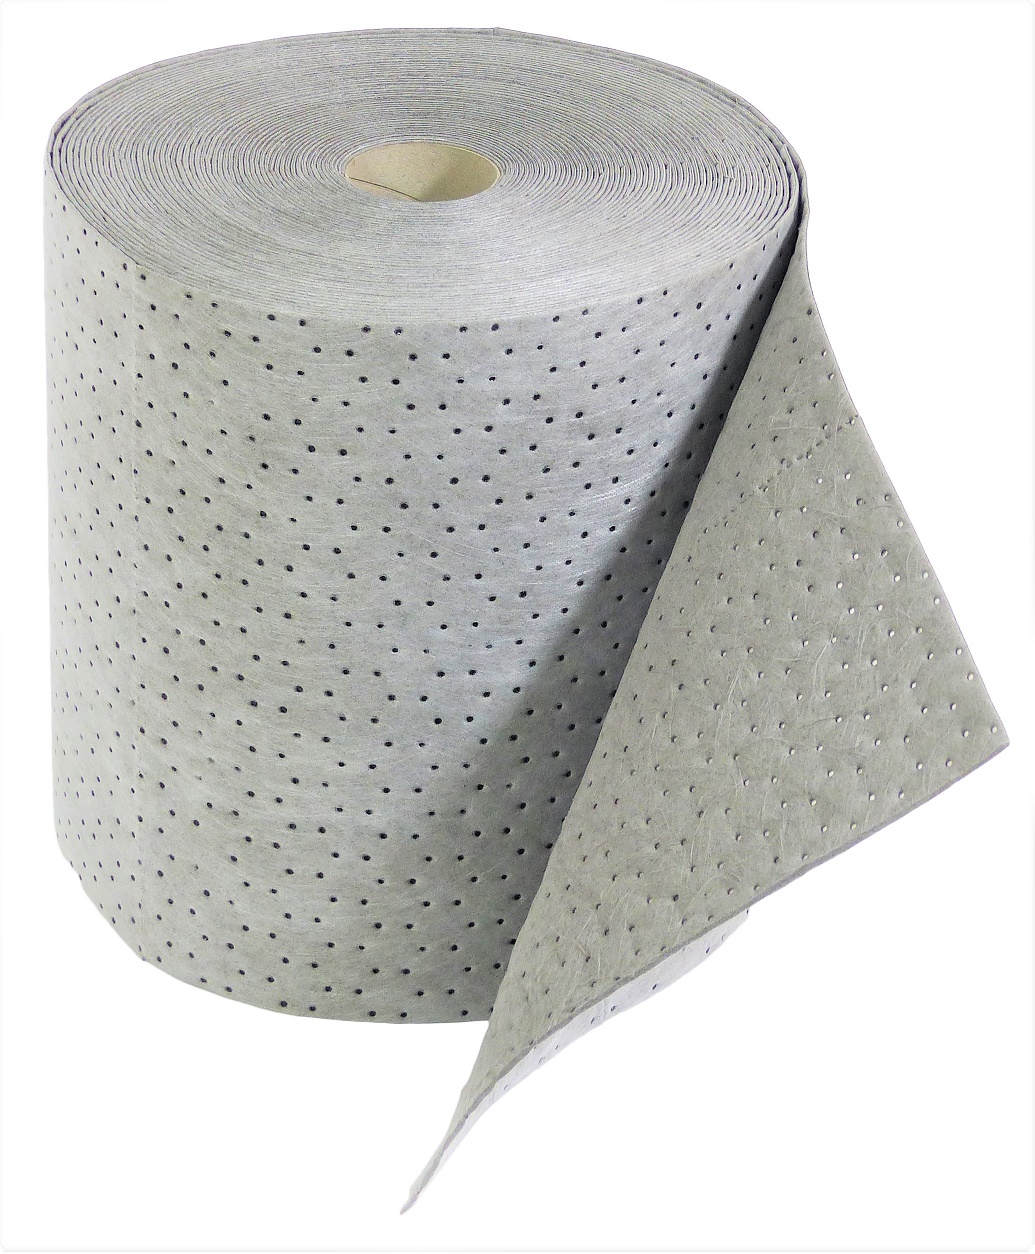 ICOSORB&#174; SM HEAVY gray as a roll